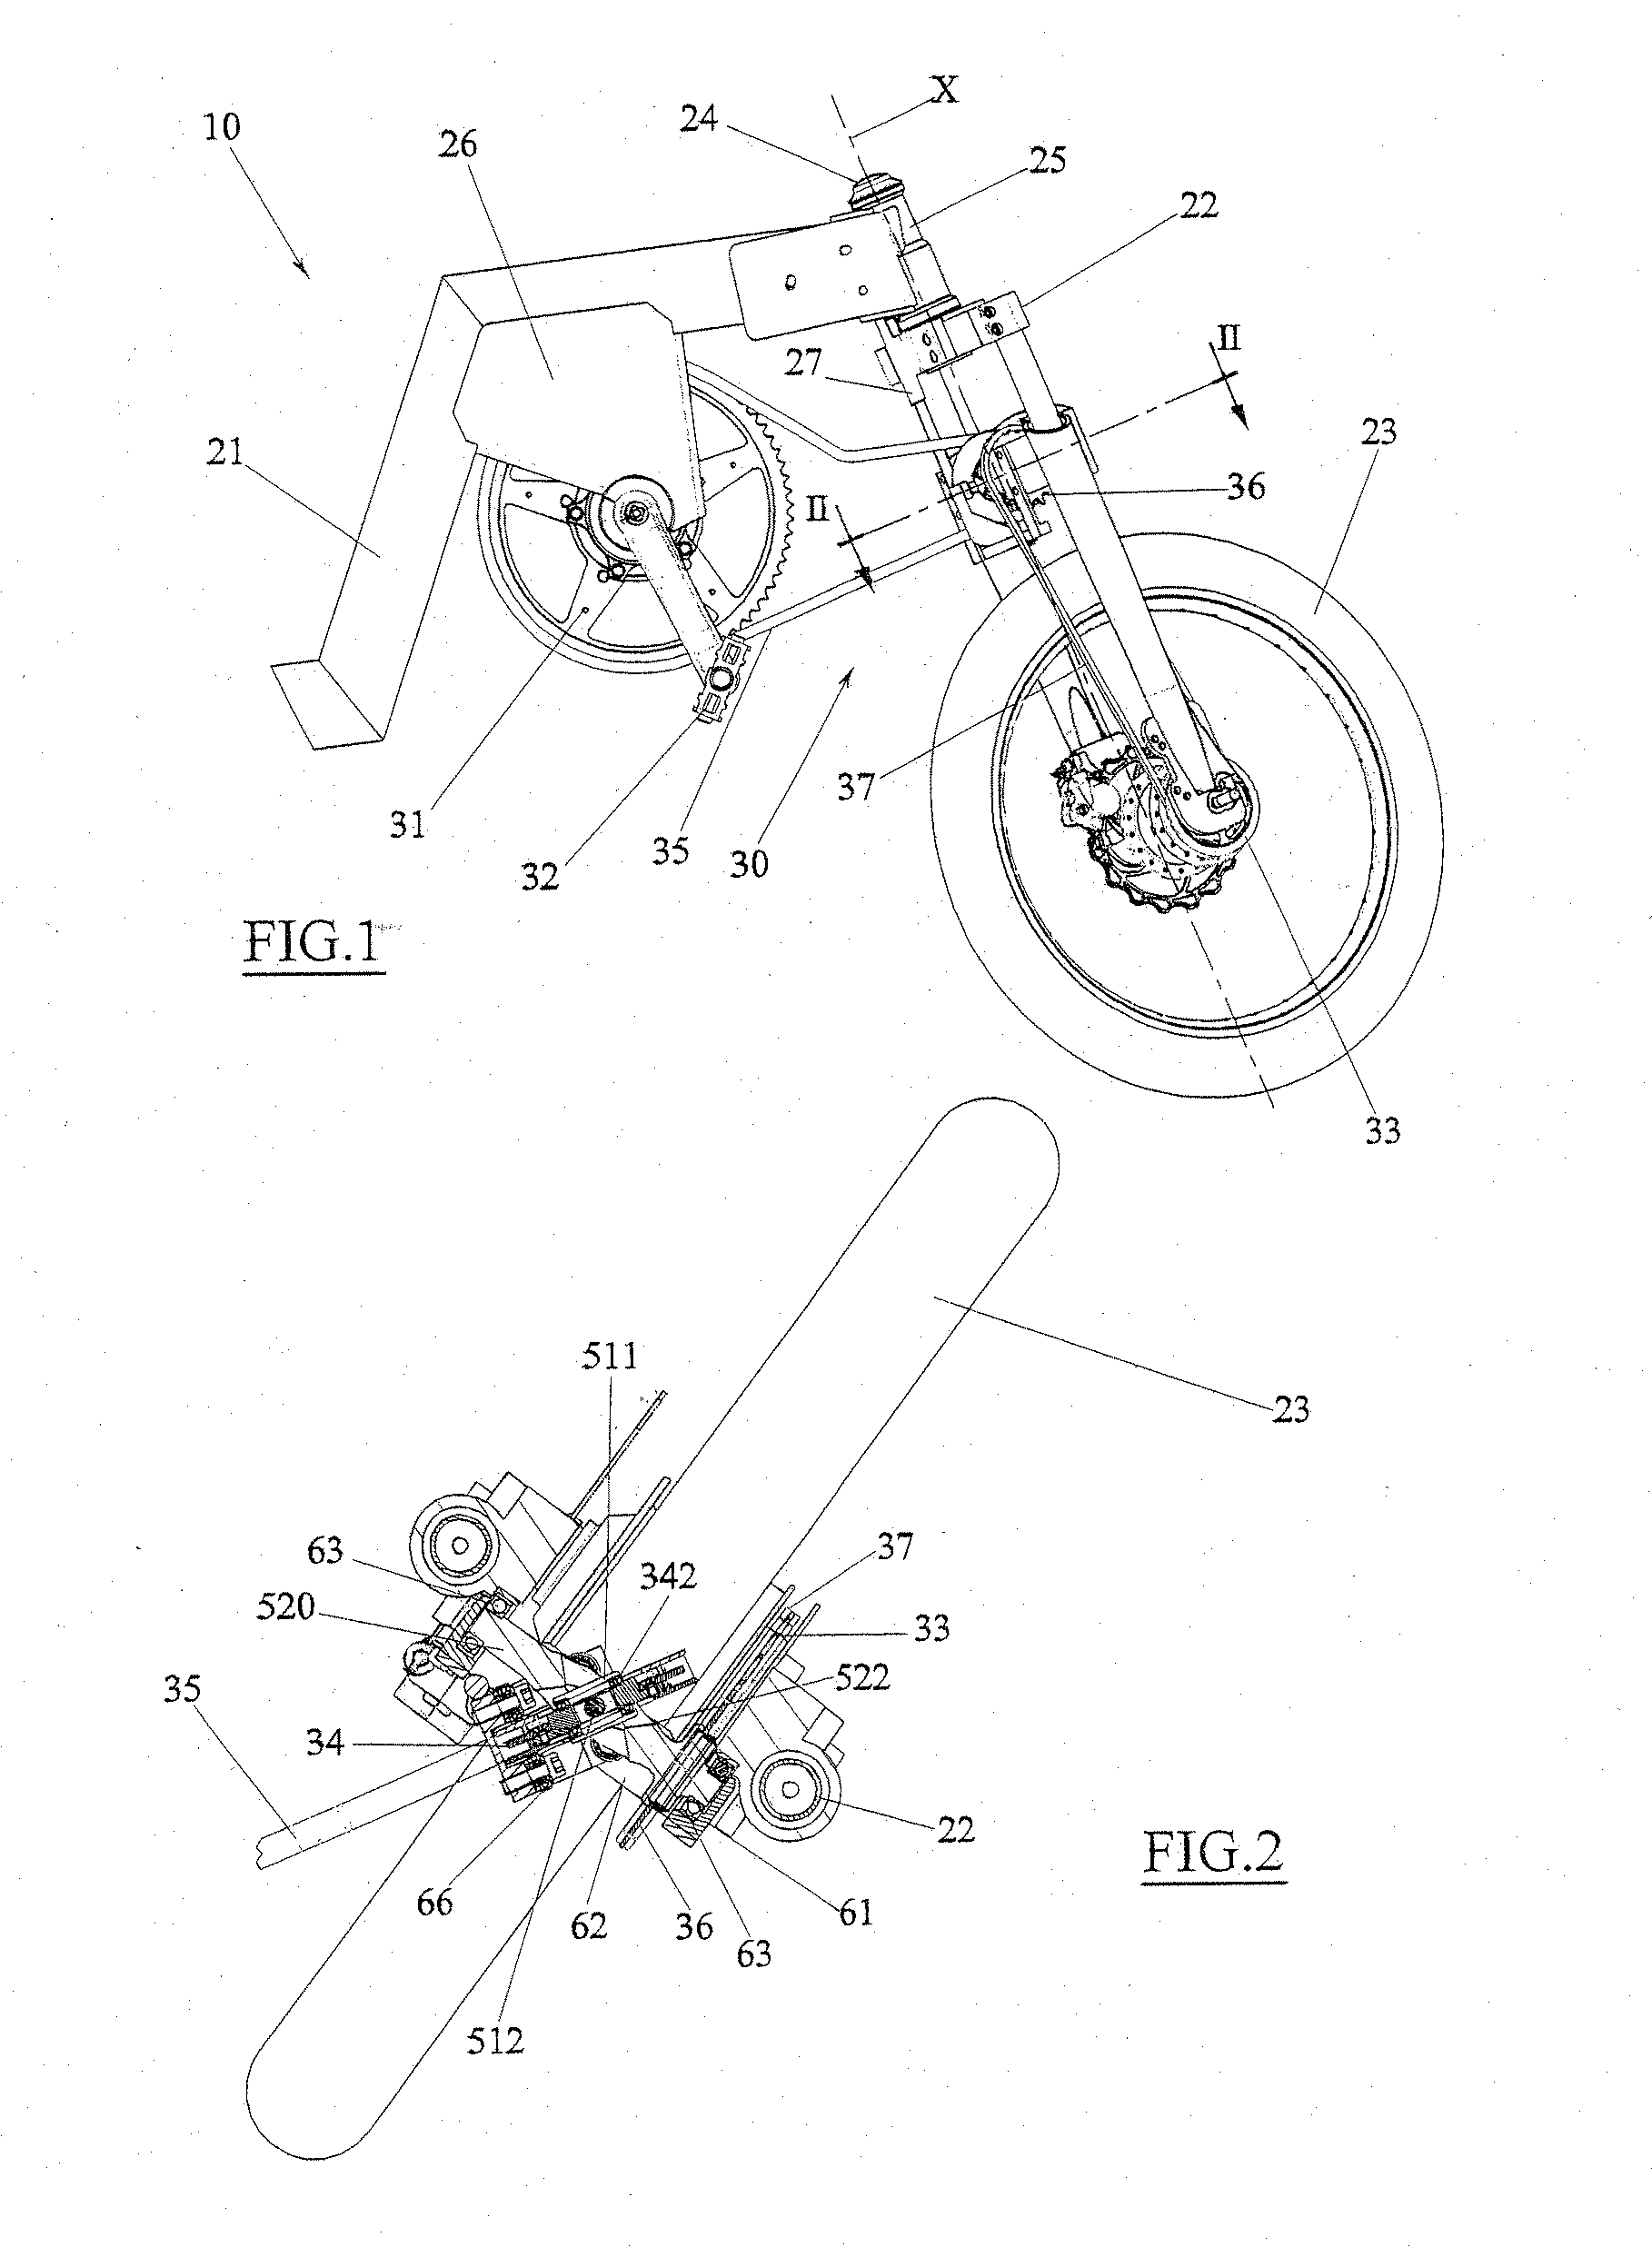 Drive transmission group to a steer wheel of a vehicle